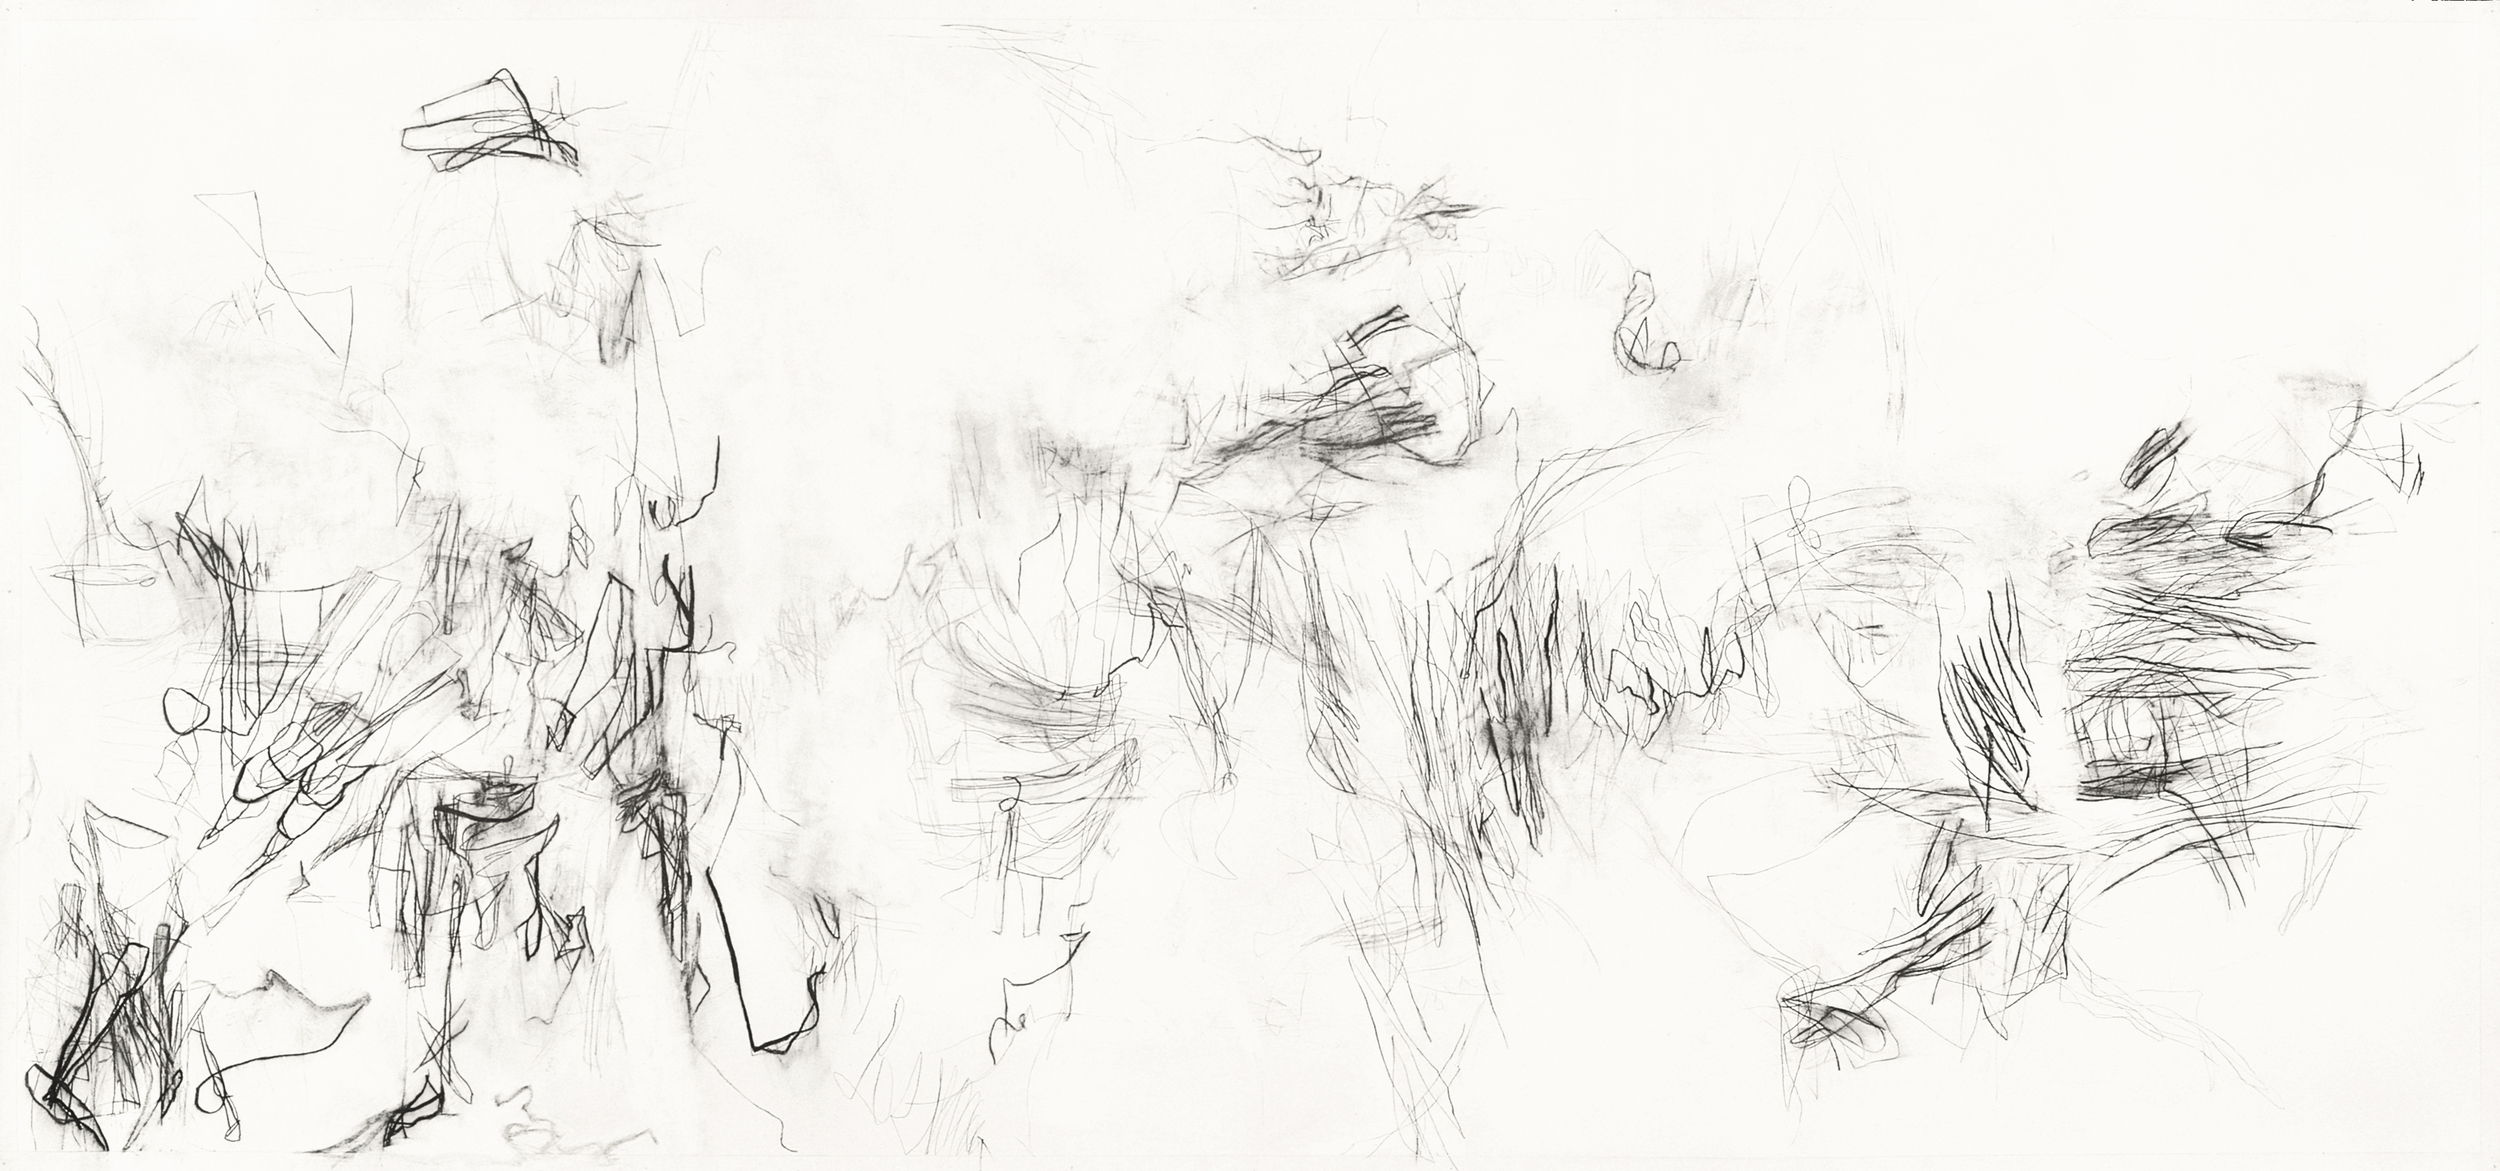   Untitled (L.00.1), 2000 charcoal, rabbit skin glue on paper 108 x 48 inches Collection: The Bryant Group   